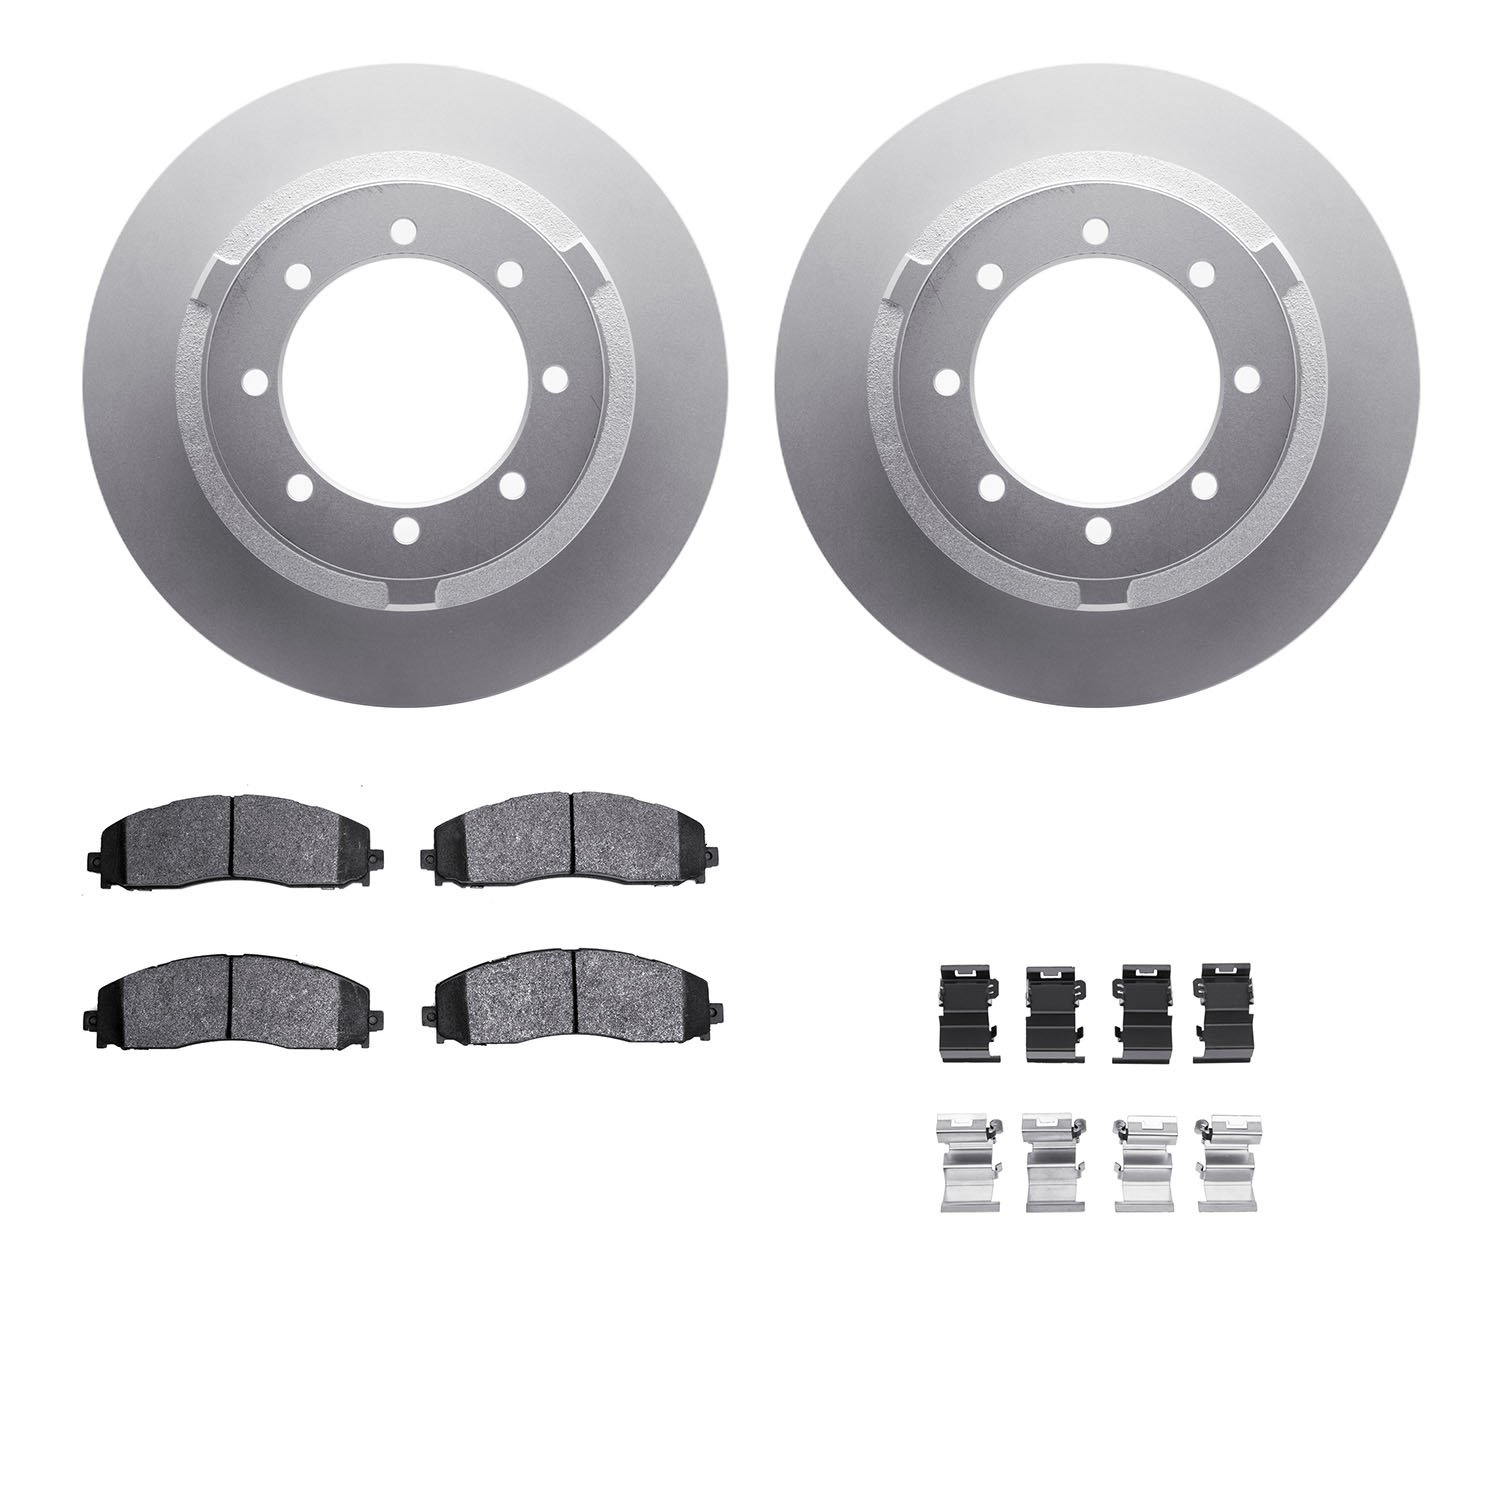 4412-54073 Geospec Brake Rotors with Ultimate-Duty Brake Pads & Hardware, Fits Select Ford/Lincoln/Mercury/Mazda, Position: Rear